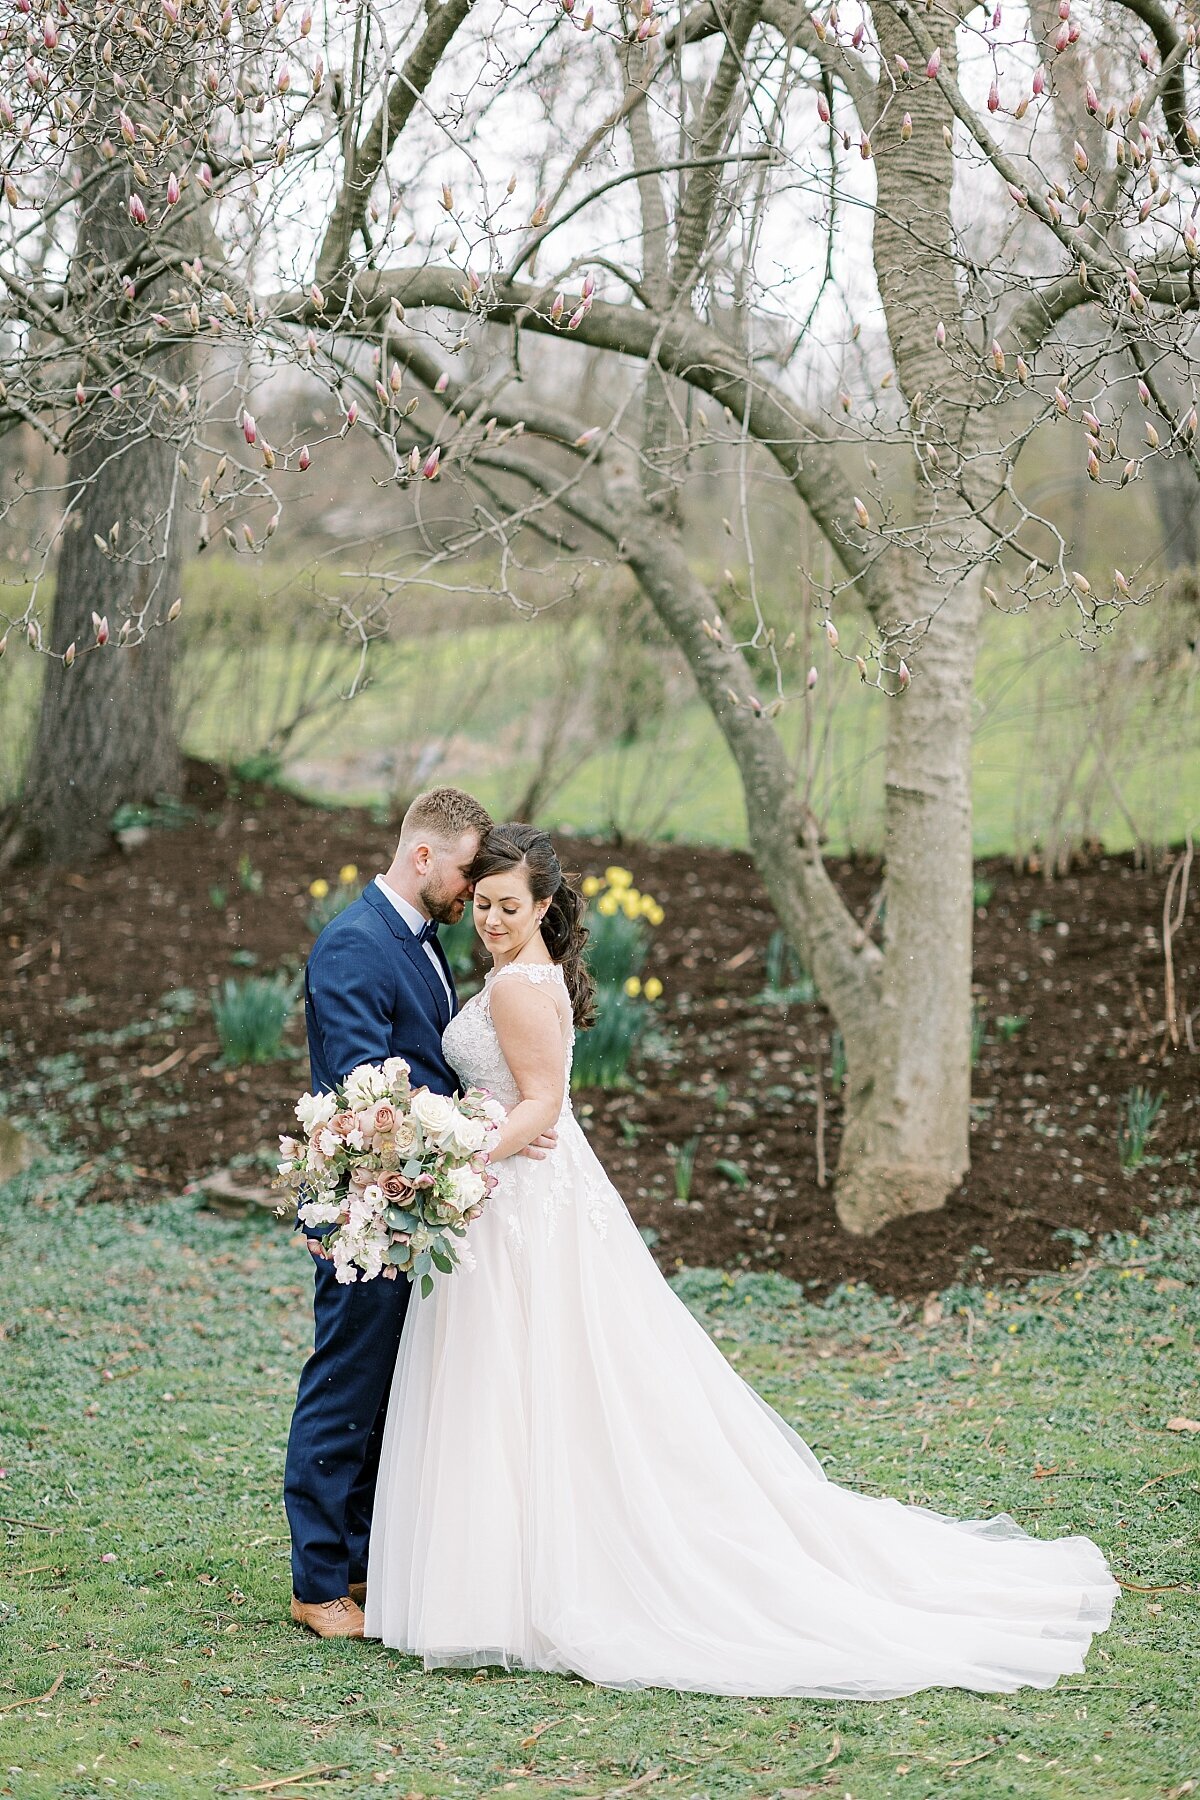 rebecca shivers photography lancaster wedding photographer riverdale manor wedding petals with style engagement photography pa central pennsylvania bright and airy  2